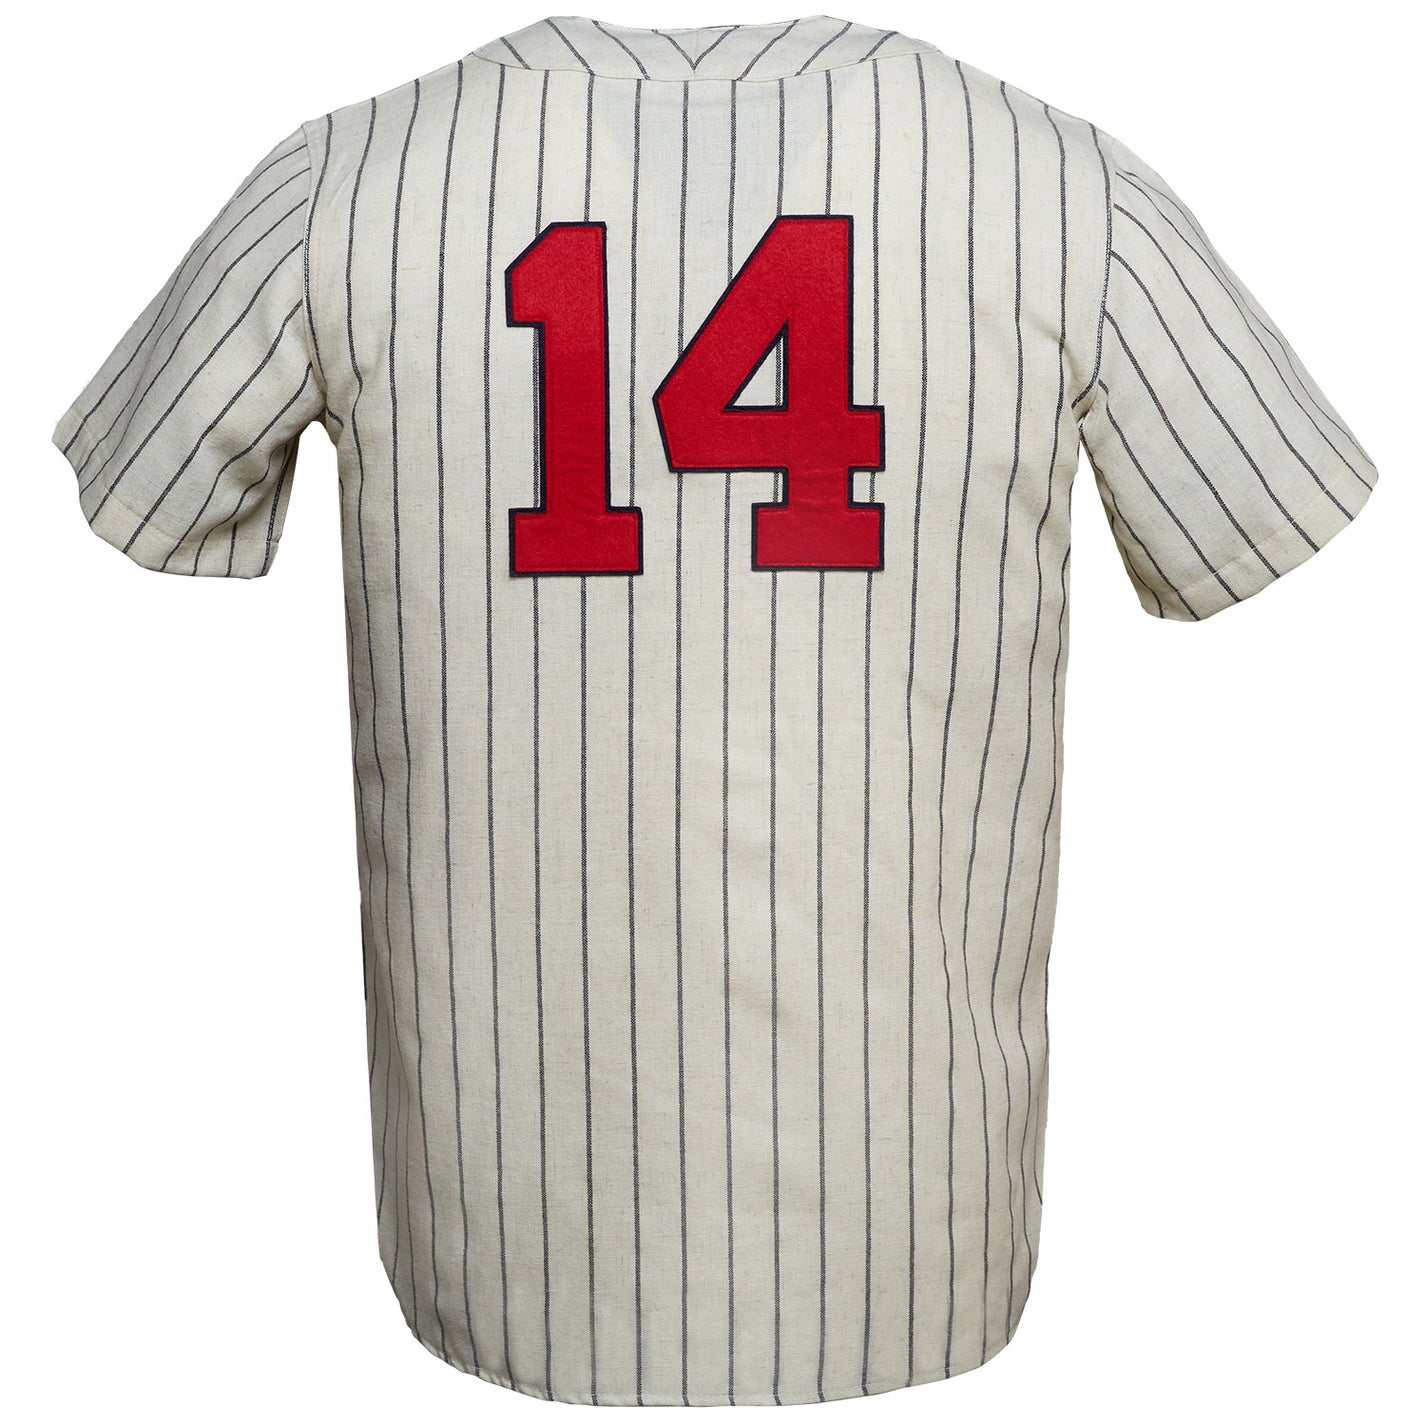 University of Mississippi 1969 Home Jersey – Ebbets Field Flannels